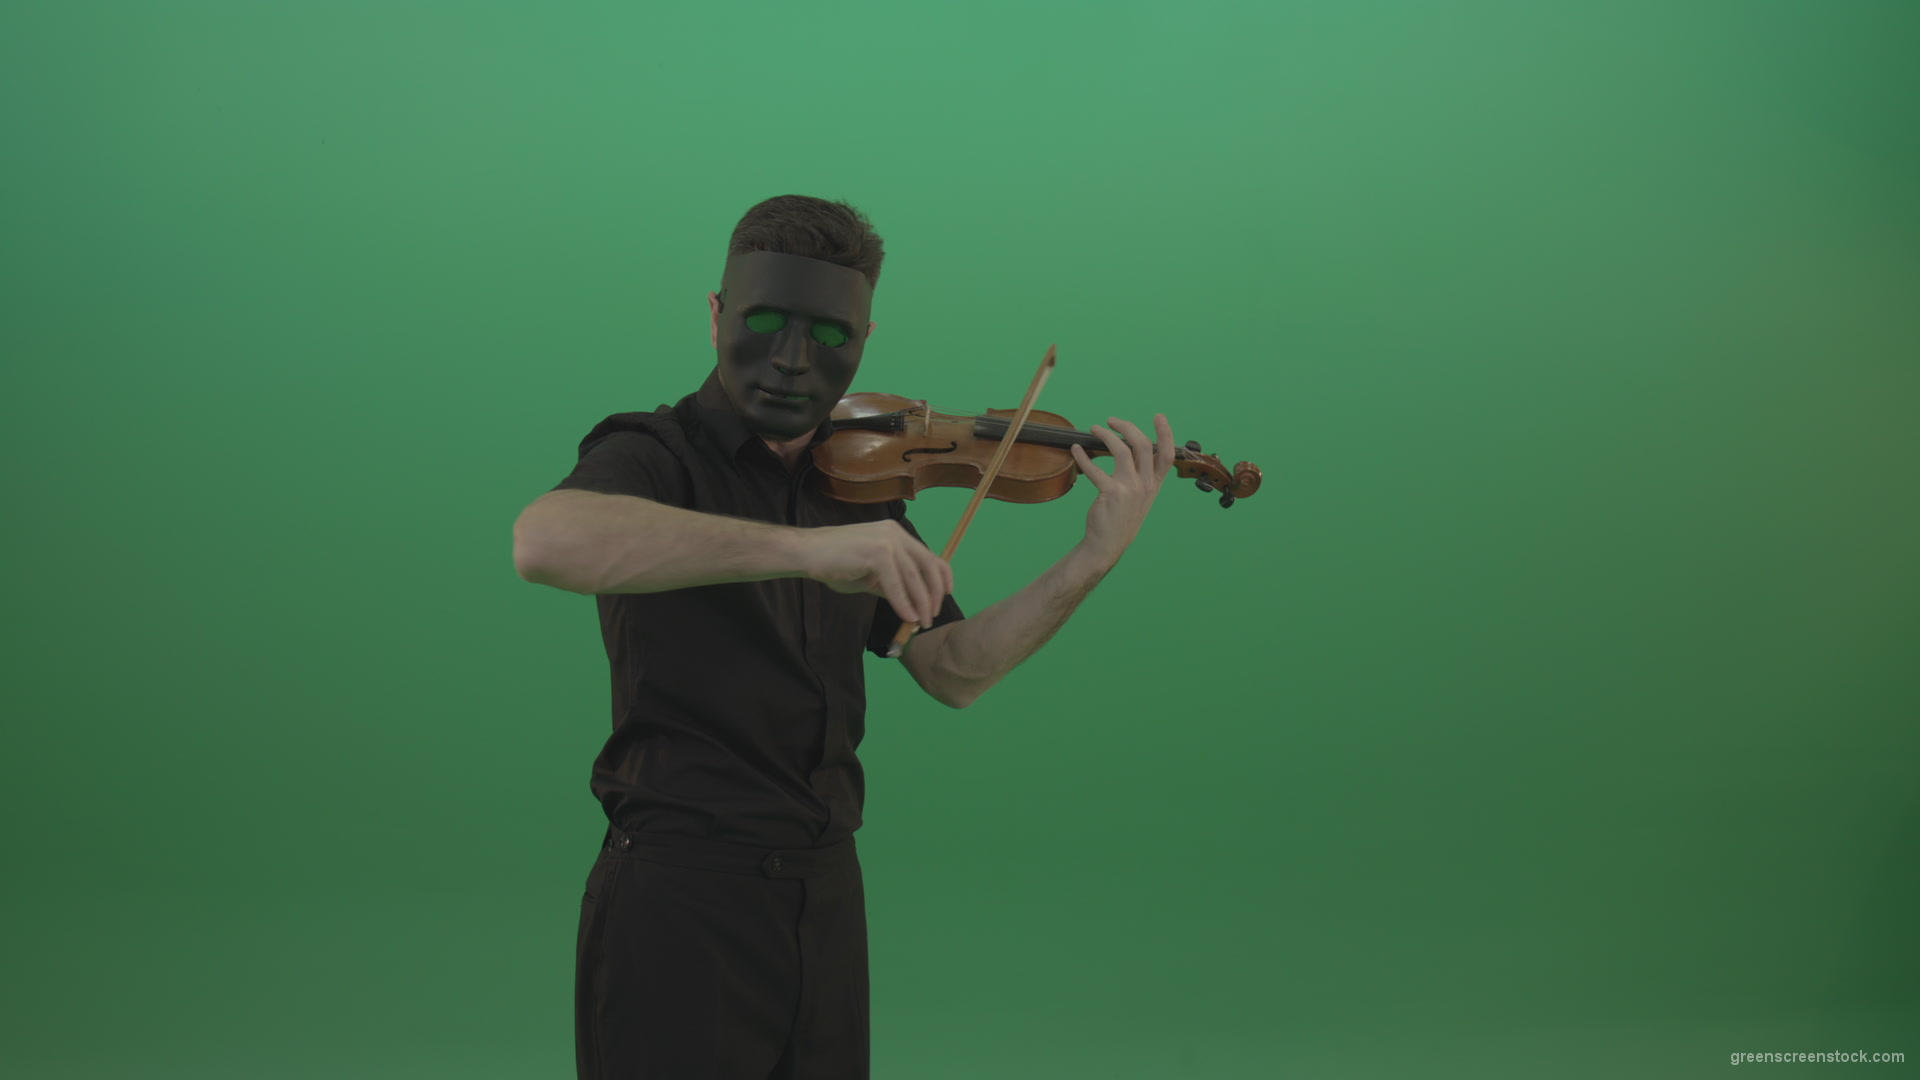 Man-in-black-wear-and-mask-play-violin-fiddle-strings-gothic-dark-music-isolated-on-green-screen_008 Green Screen Stock